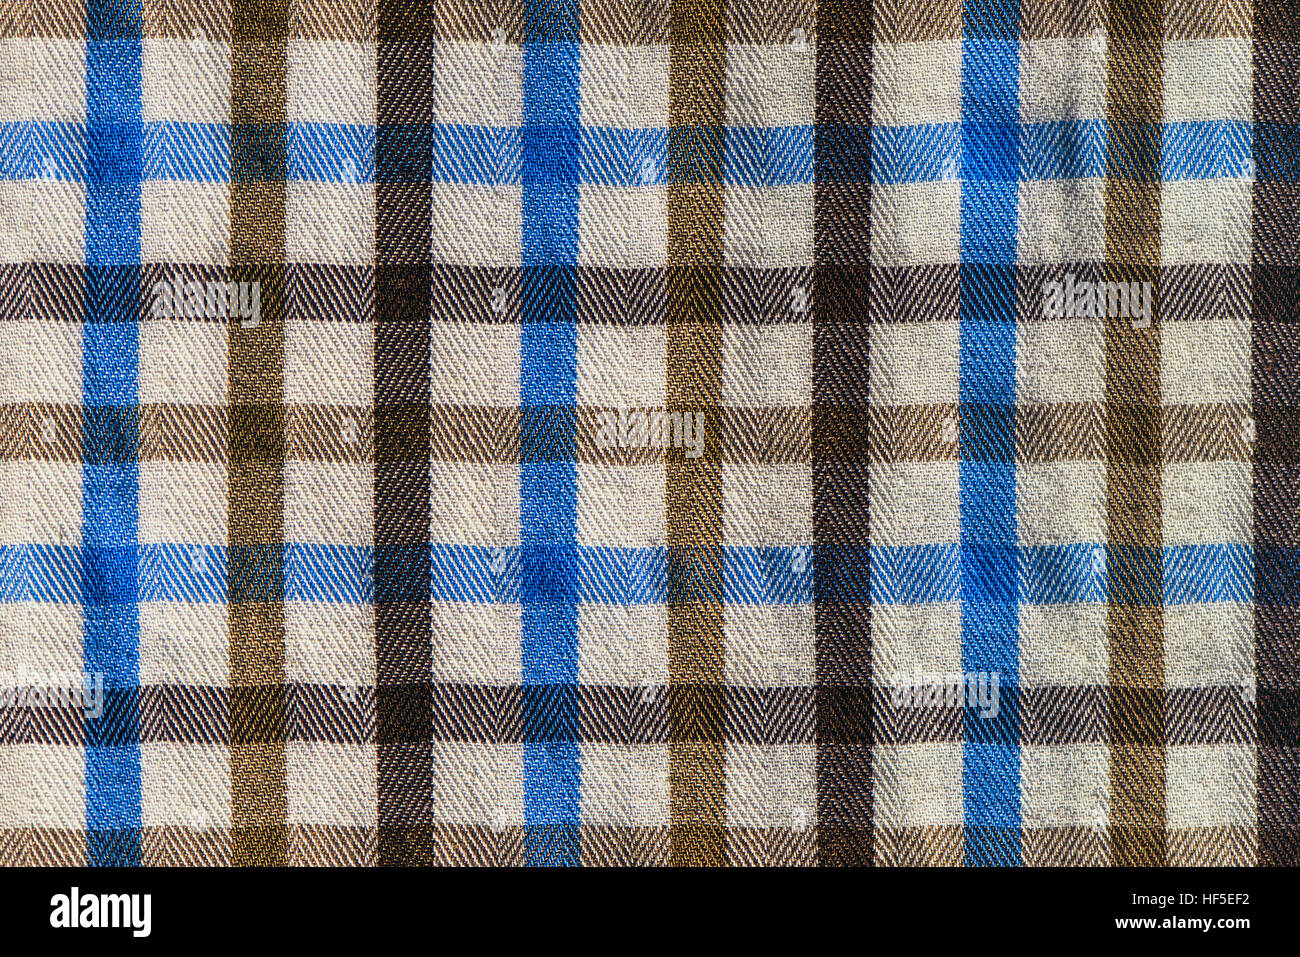 Plaid a scacchi materiale tessile texture pattern, macro Foto Stock